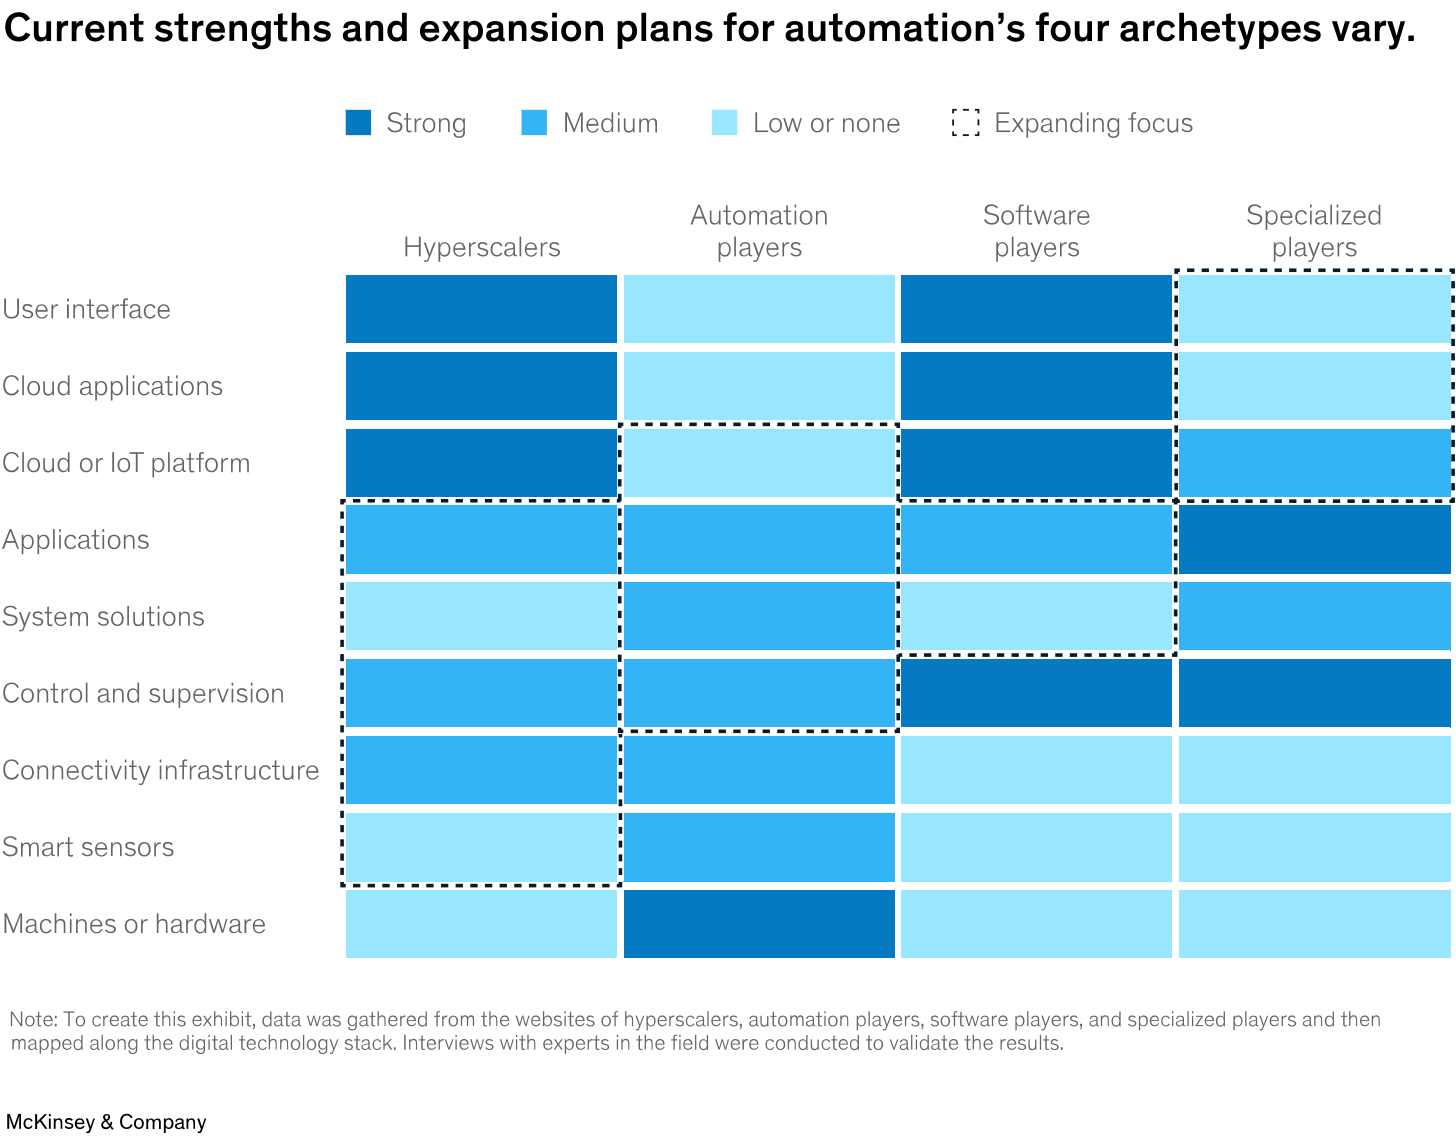 Current strengths and expansion plans for automation’s four archetypes vary.